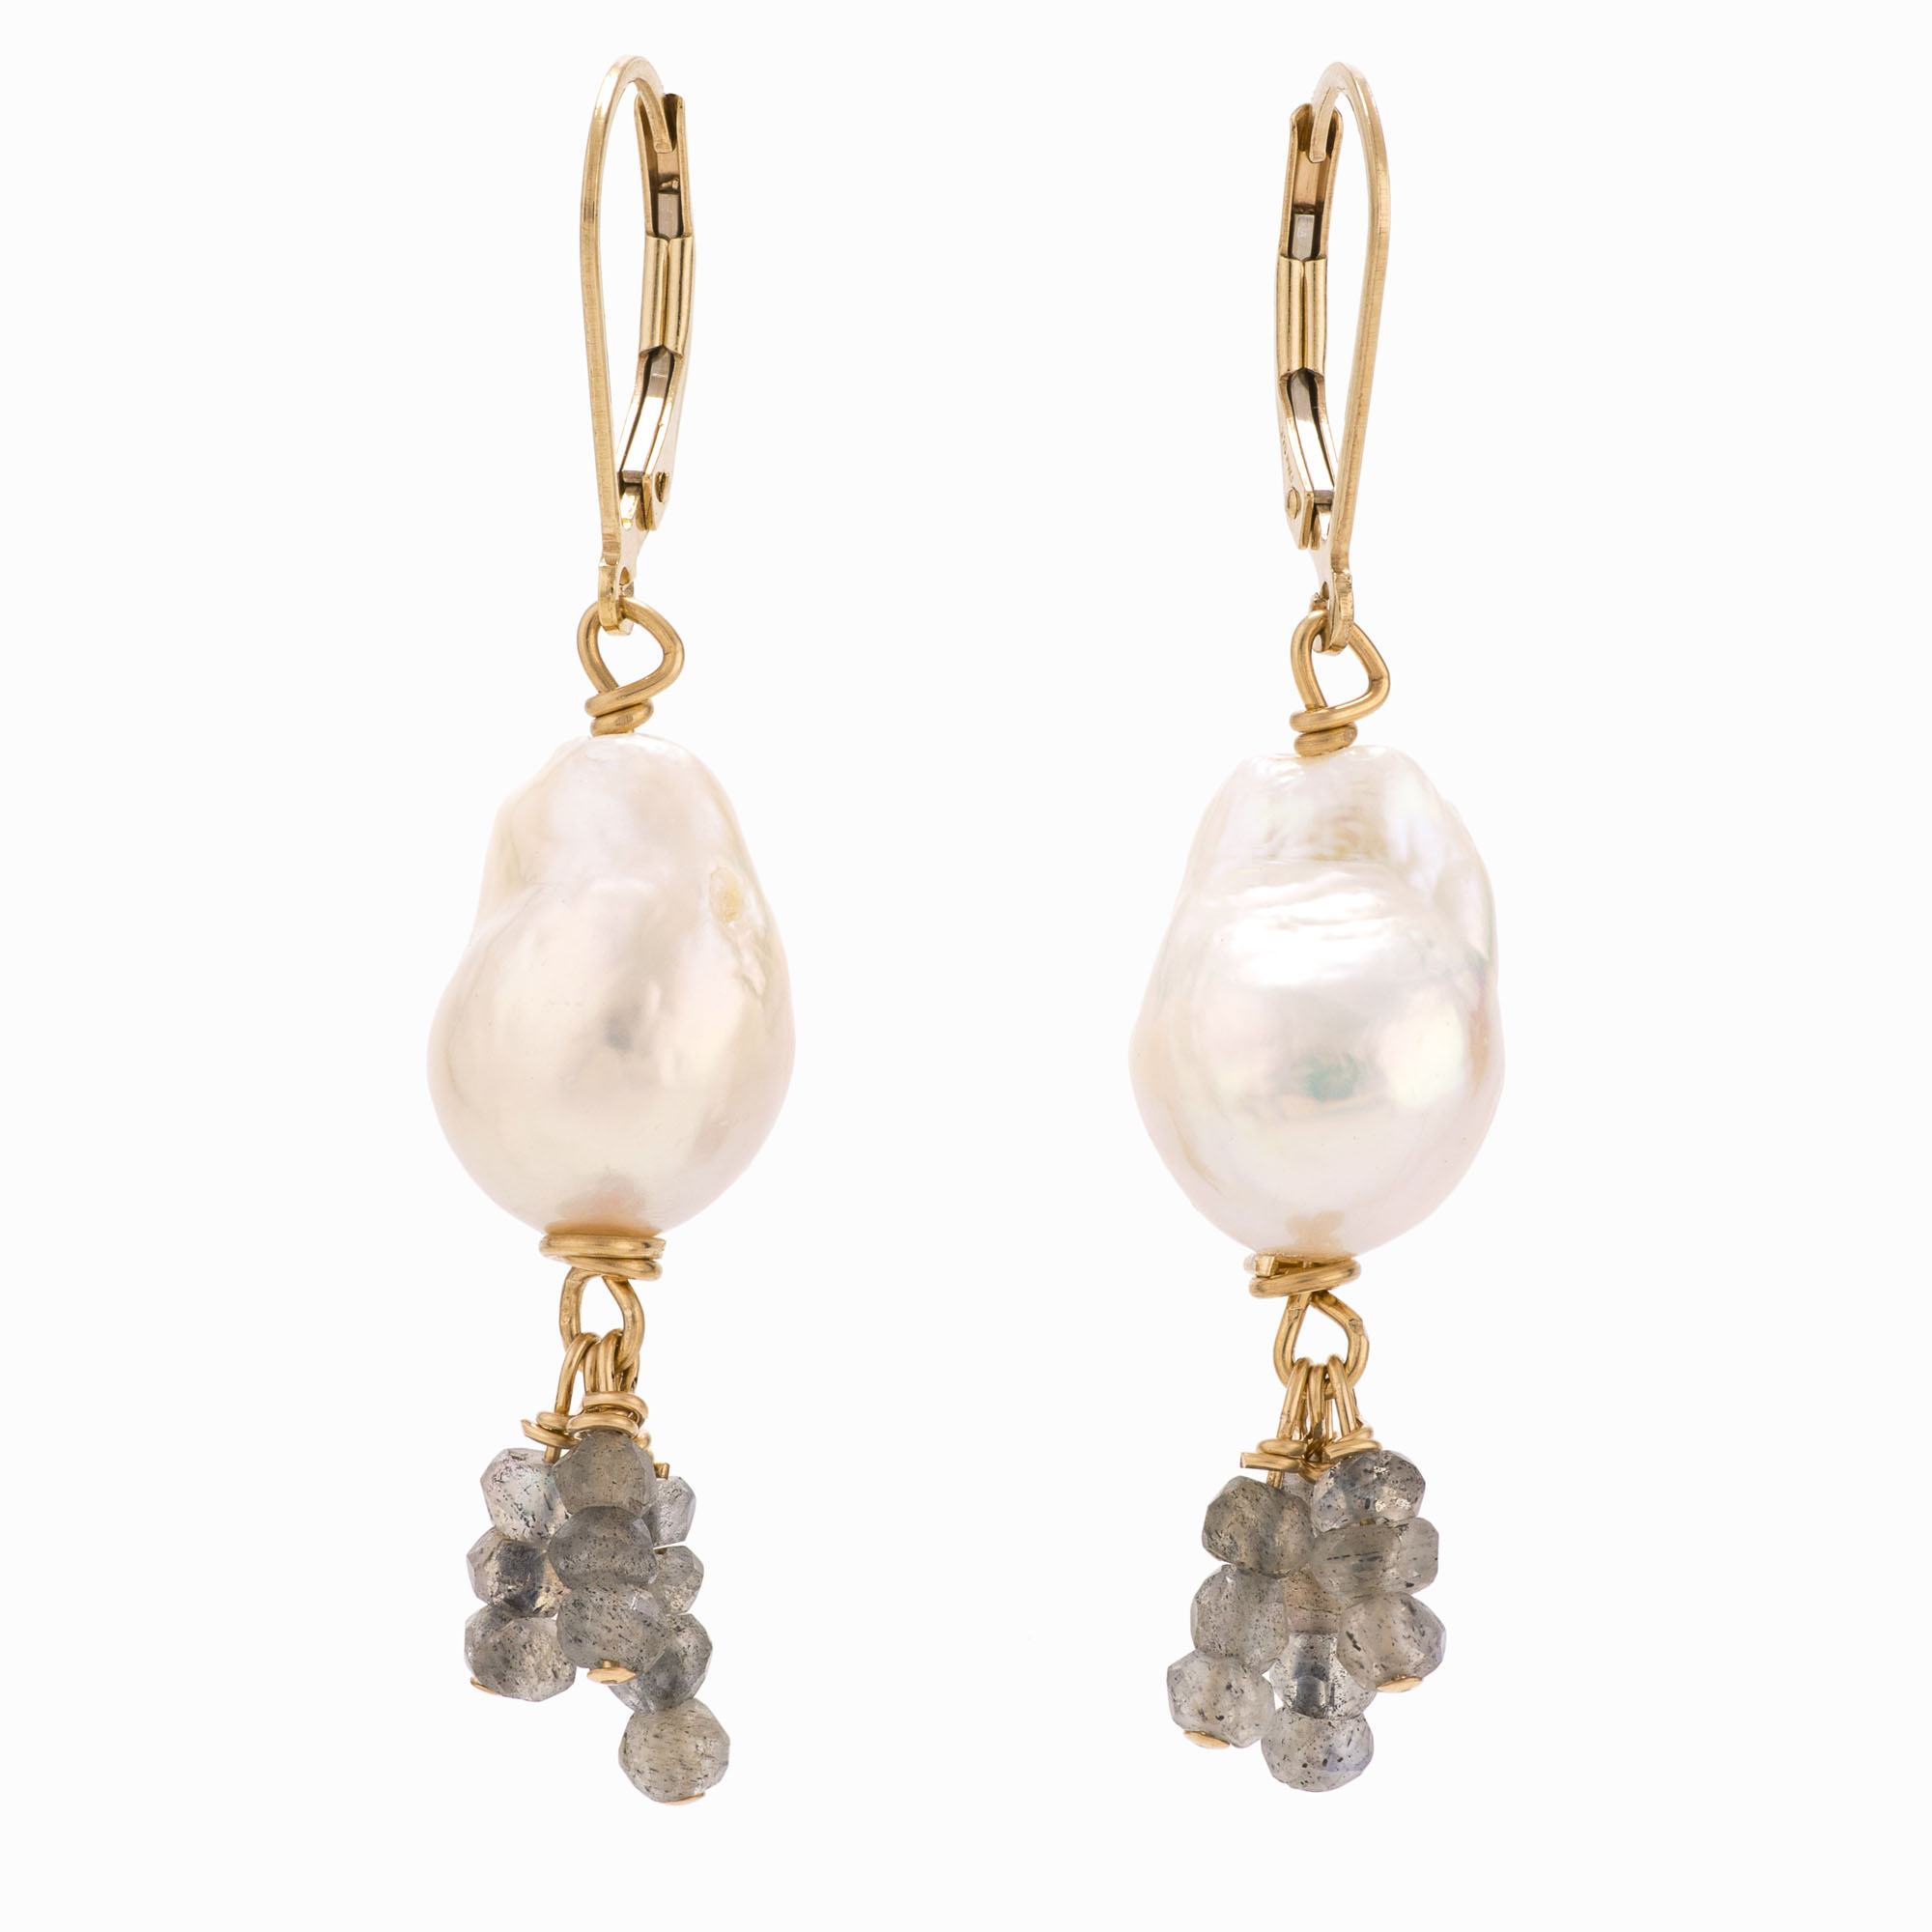 Featured image for “Hali Pearl Earrings”